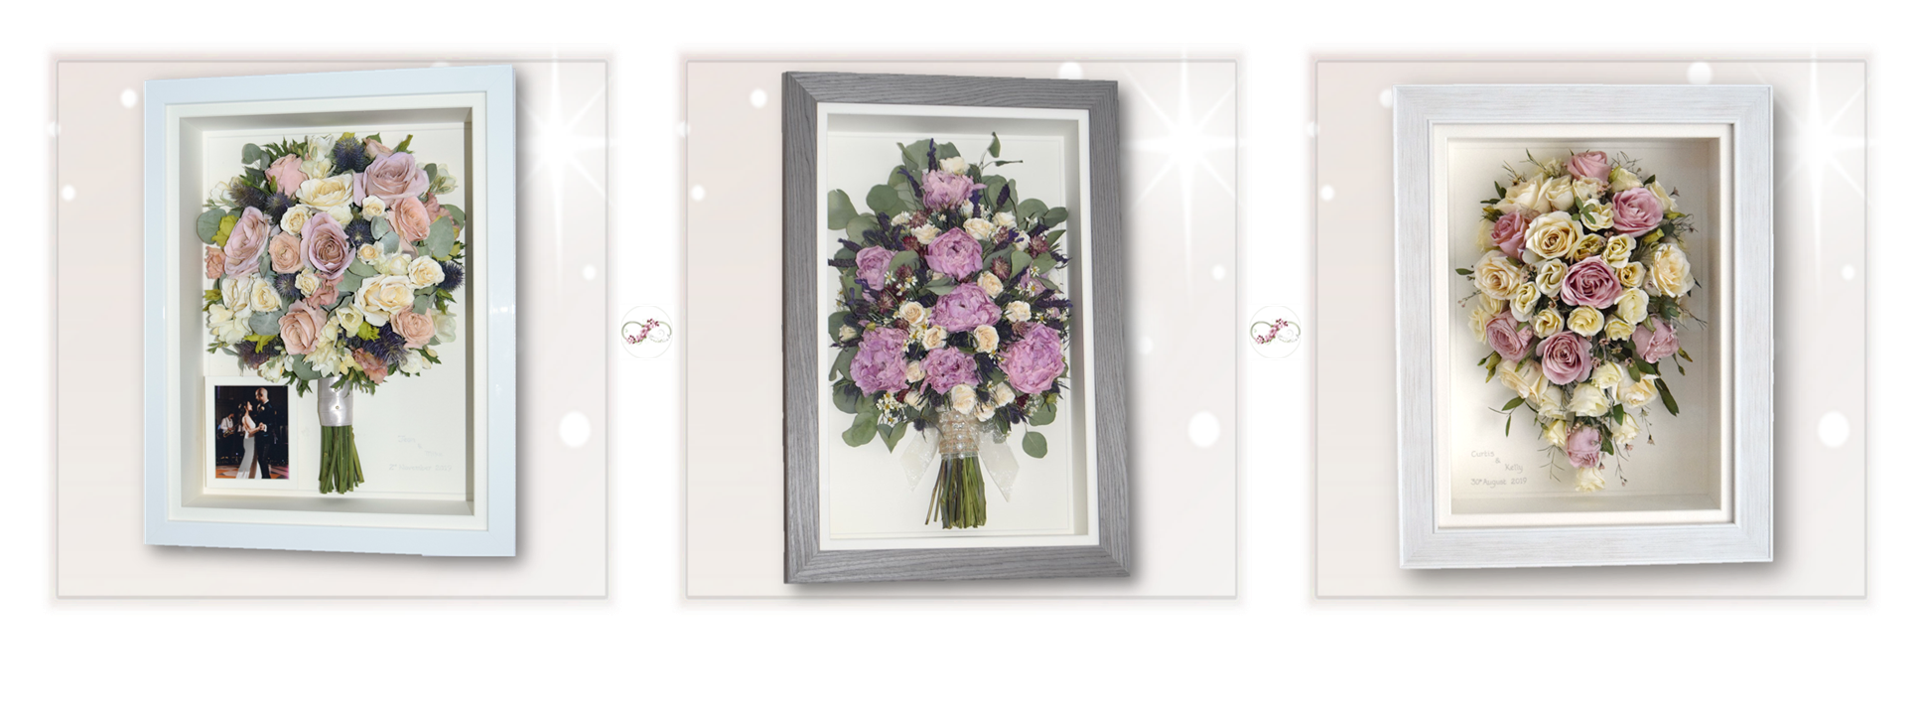 Flower preservation preserved bridal bouquets framed in shadow box